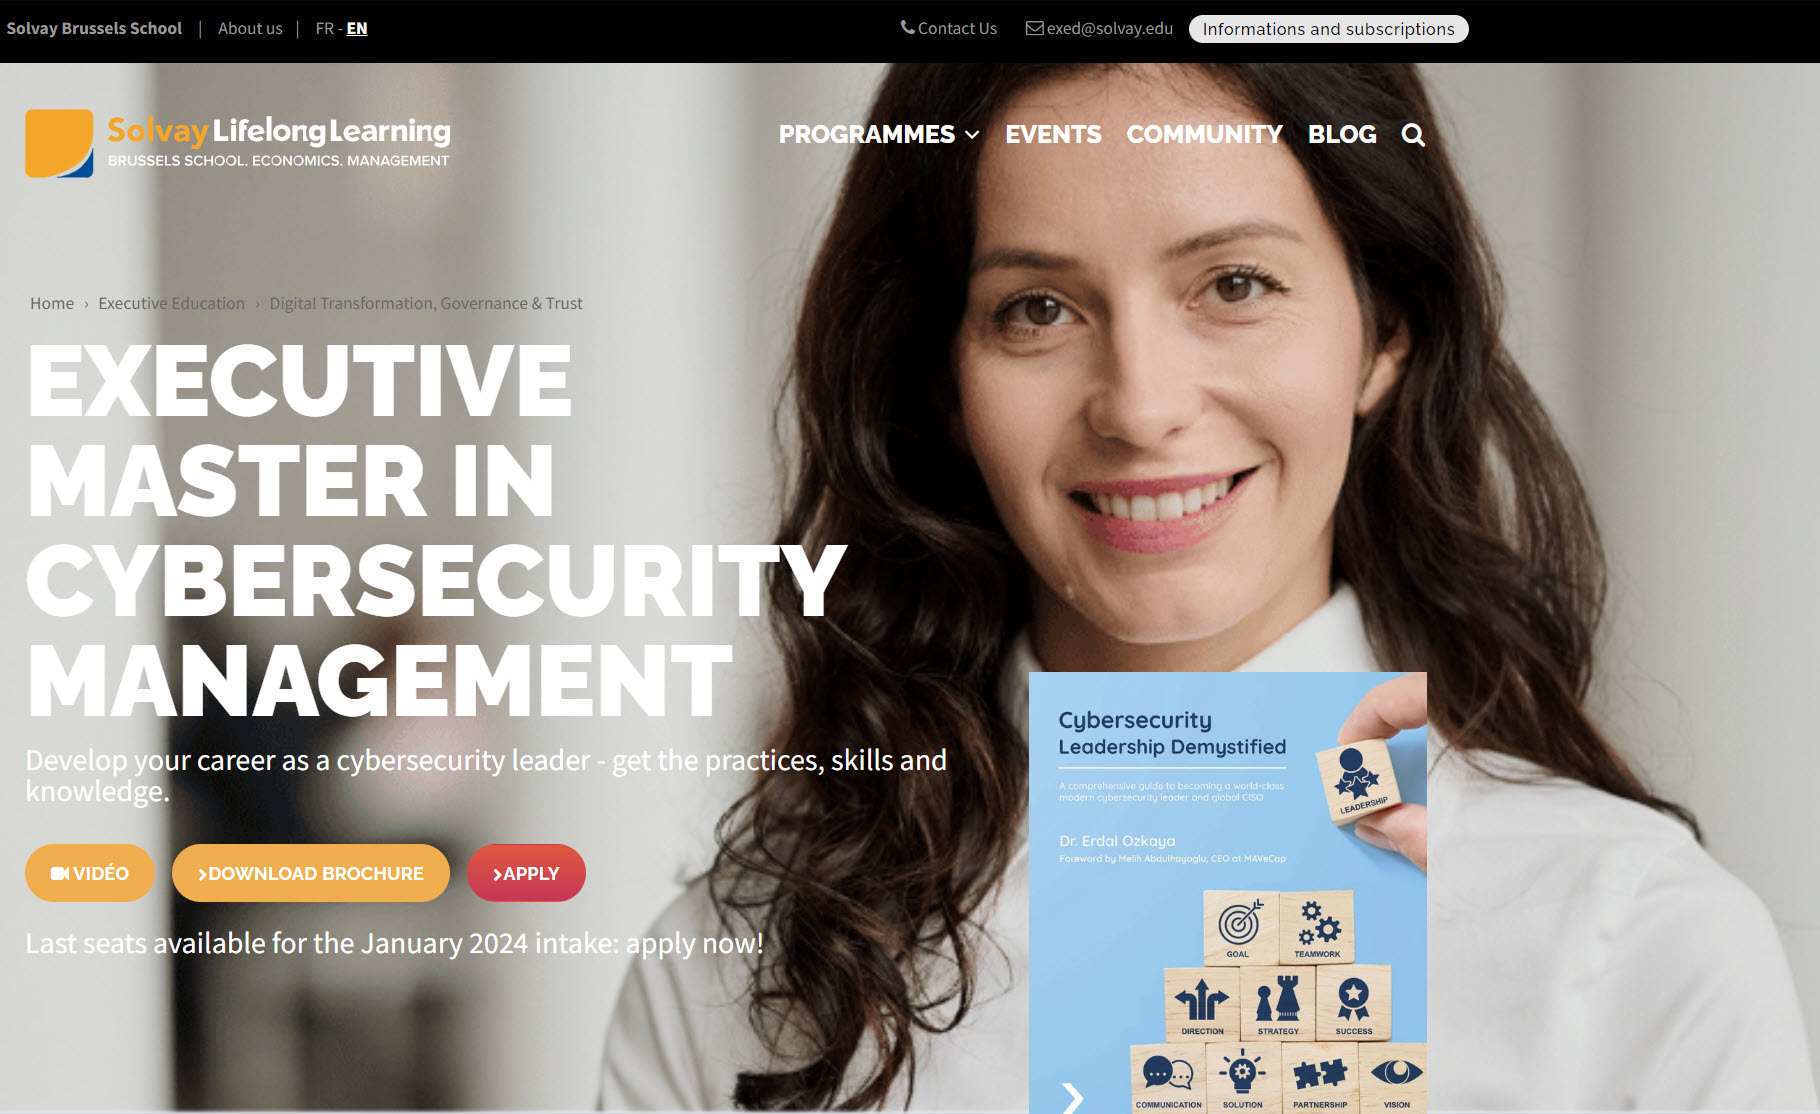 EXECUTIVE MASTER IN CYBERSECURITY MANAGEMENT